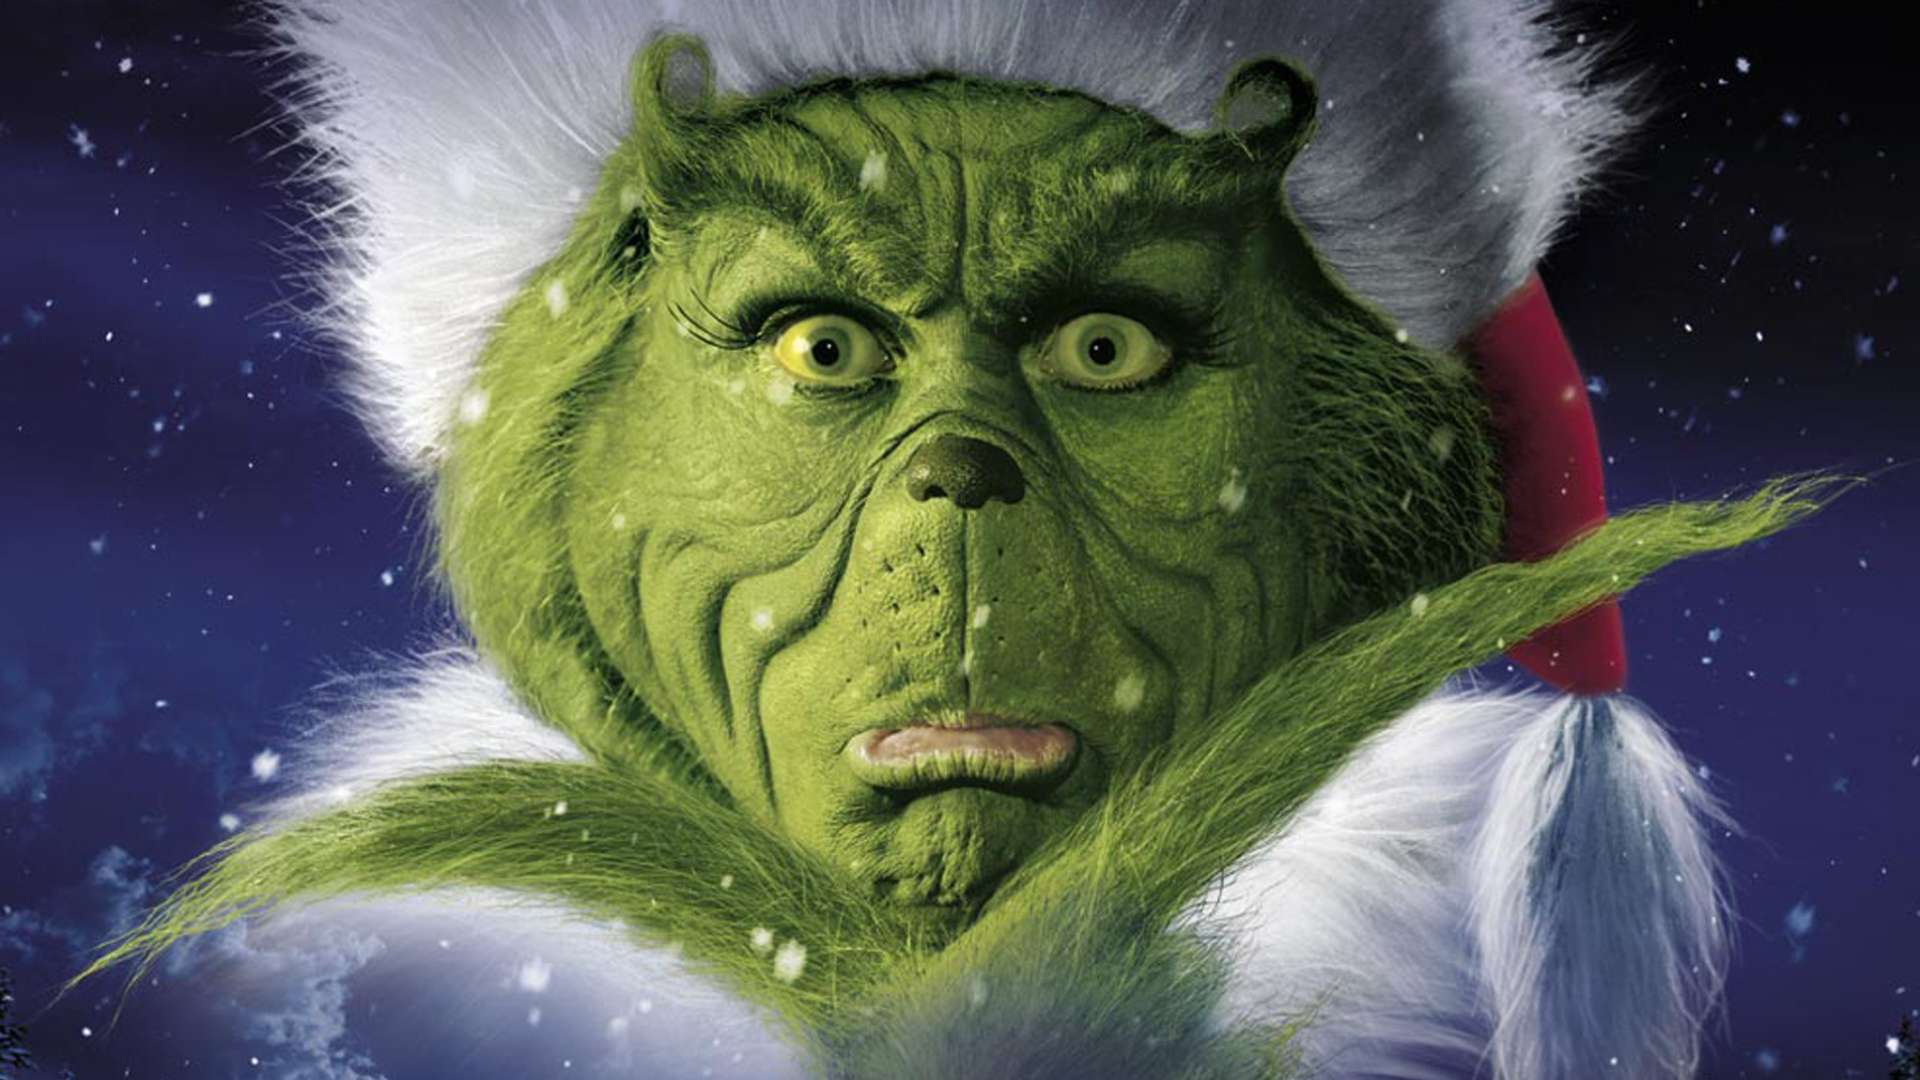 Don’t Let the Grinch Steal Christmas 3